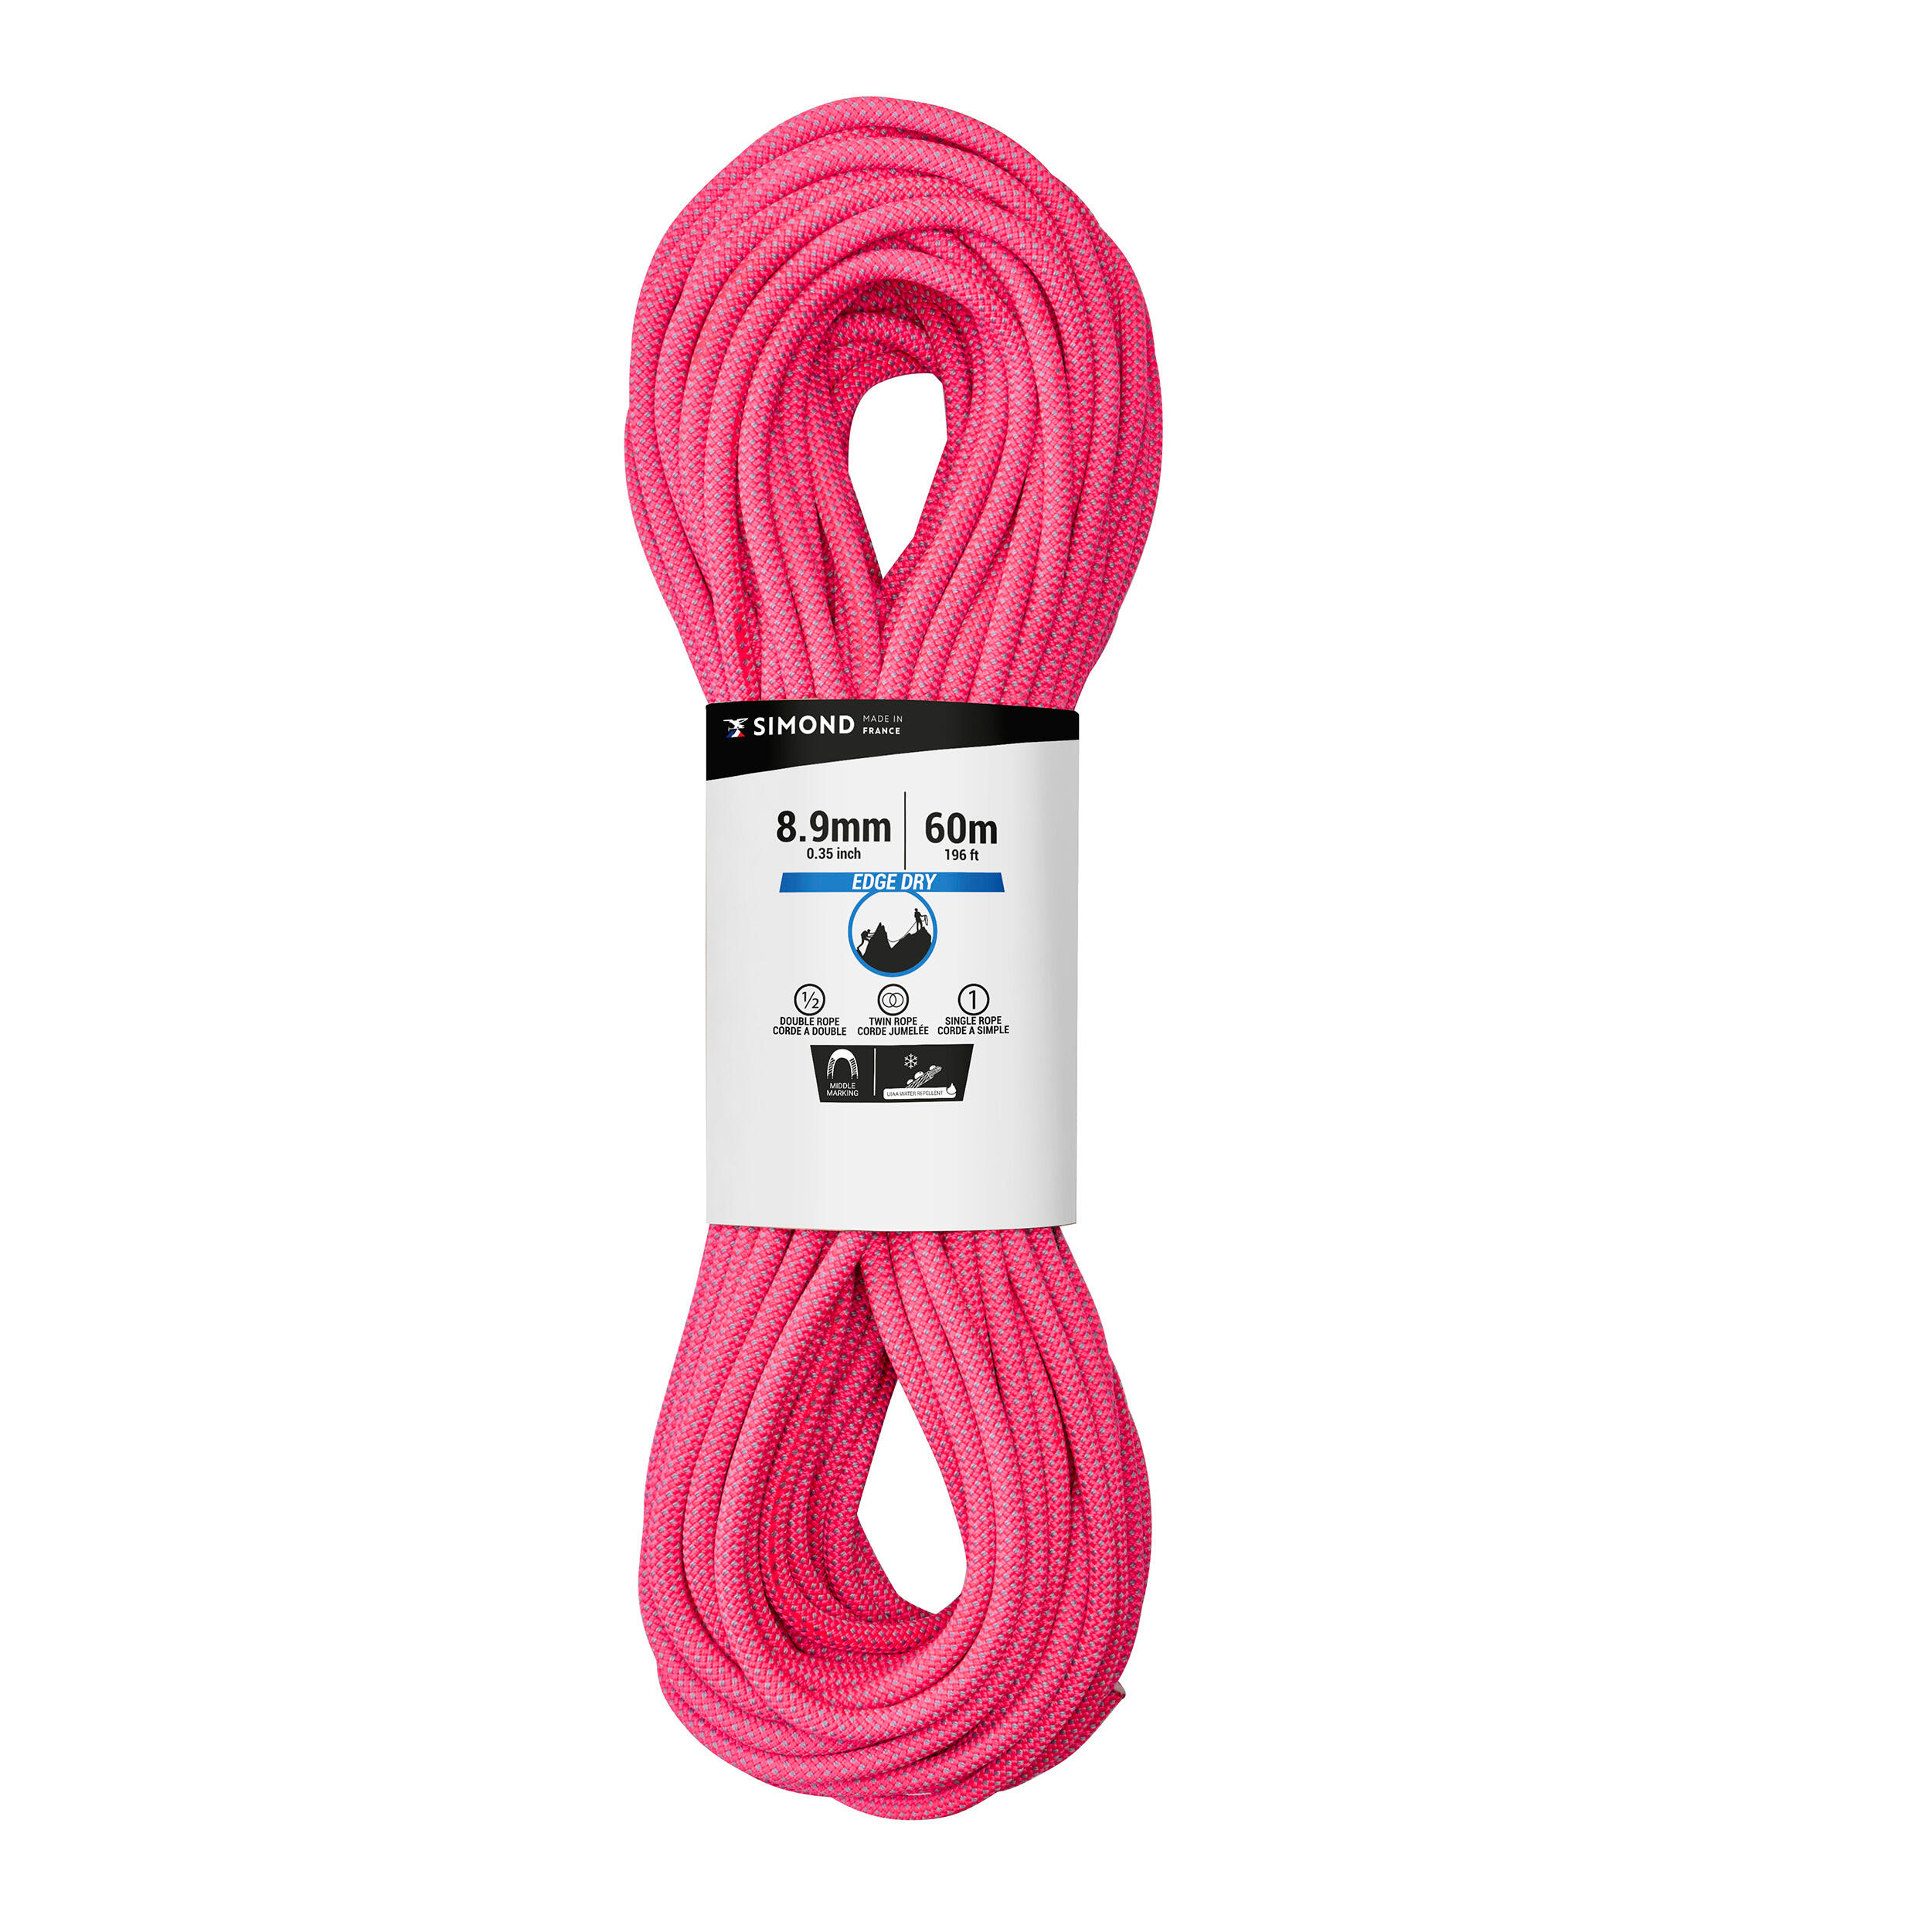 CLIMBING AND MOUNTAINEERING TRIPLE ROPE STANDARD 8.9 mm x 60 m - EDGE DRY PINK 1/4